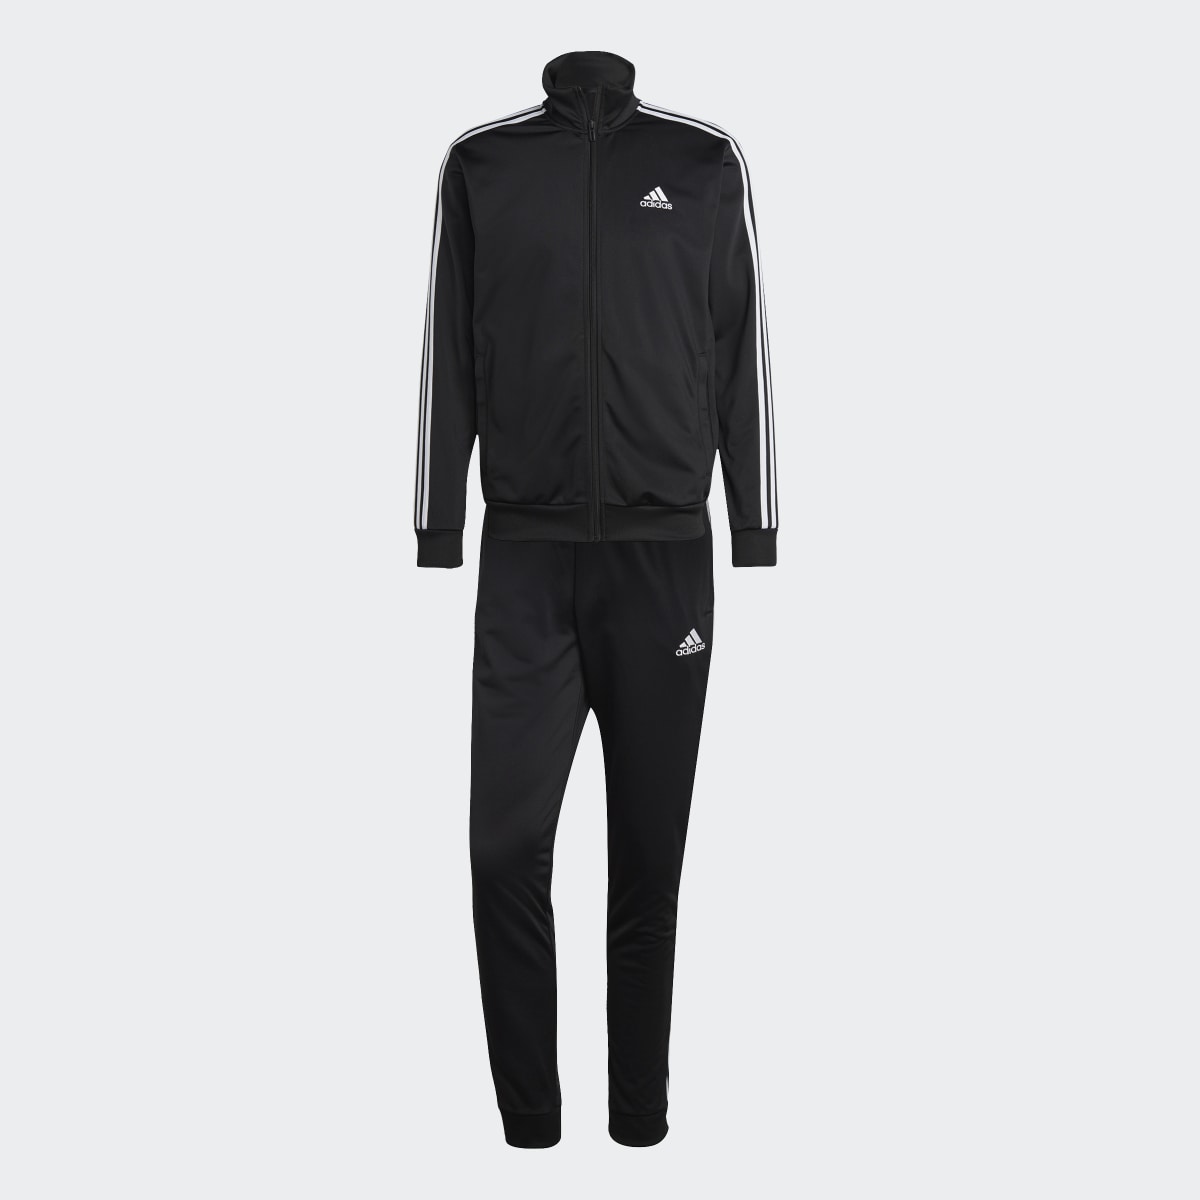 Adidas Basic 3-Stripes Tricot Track Suit. 7